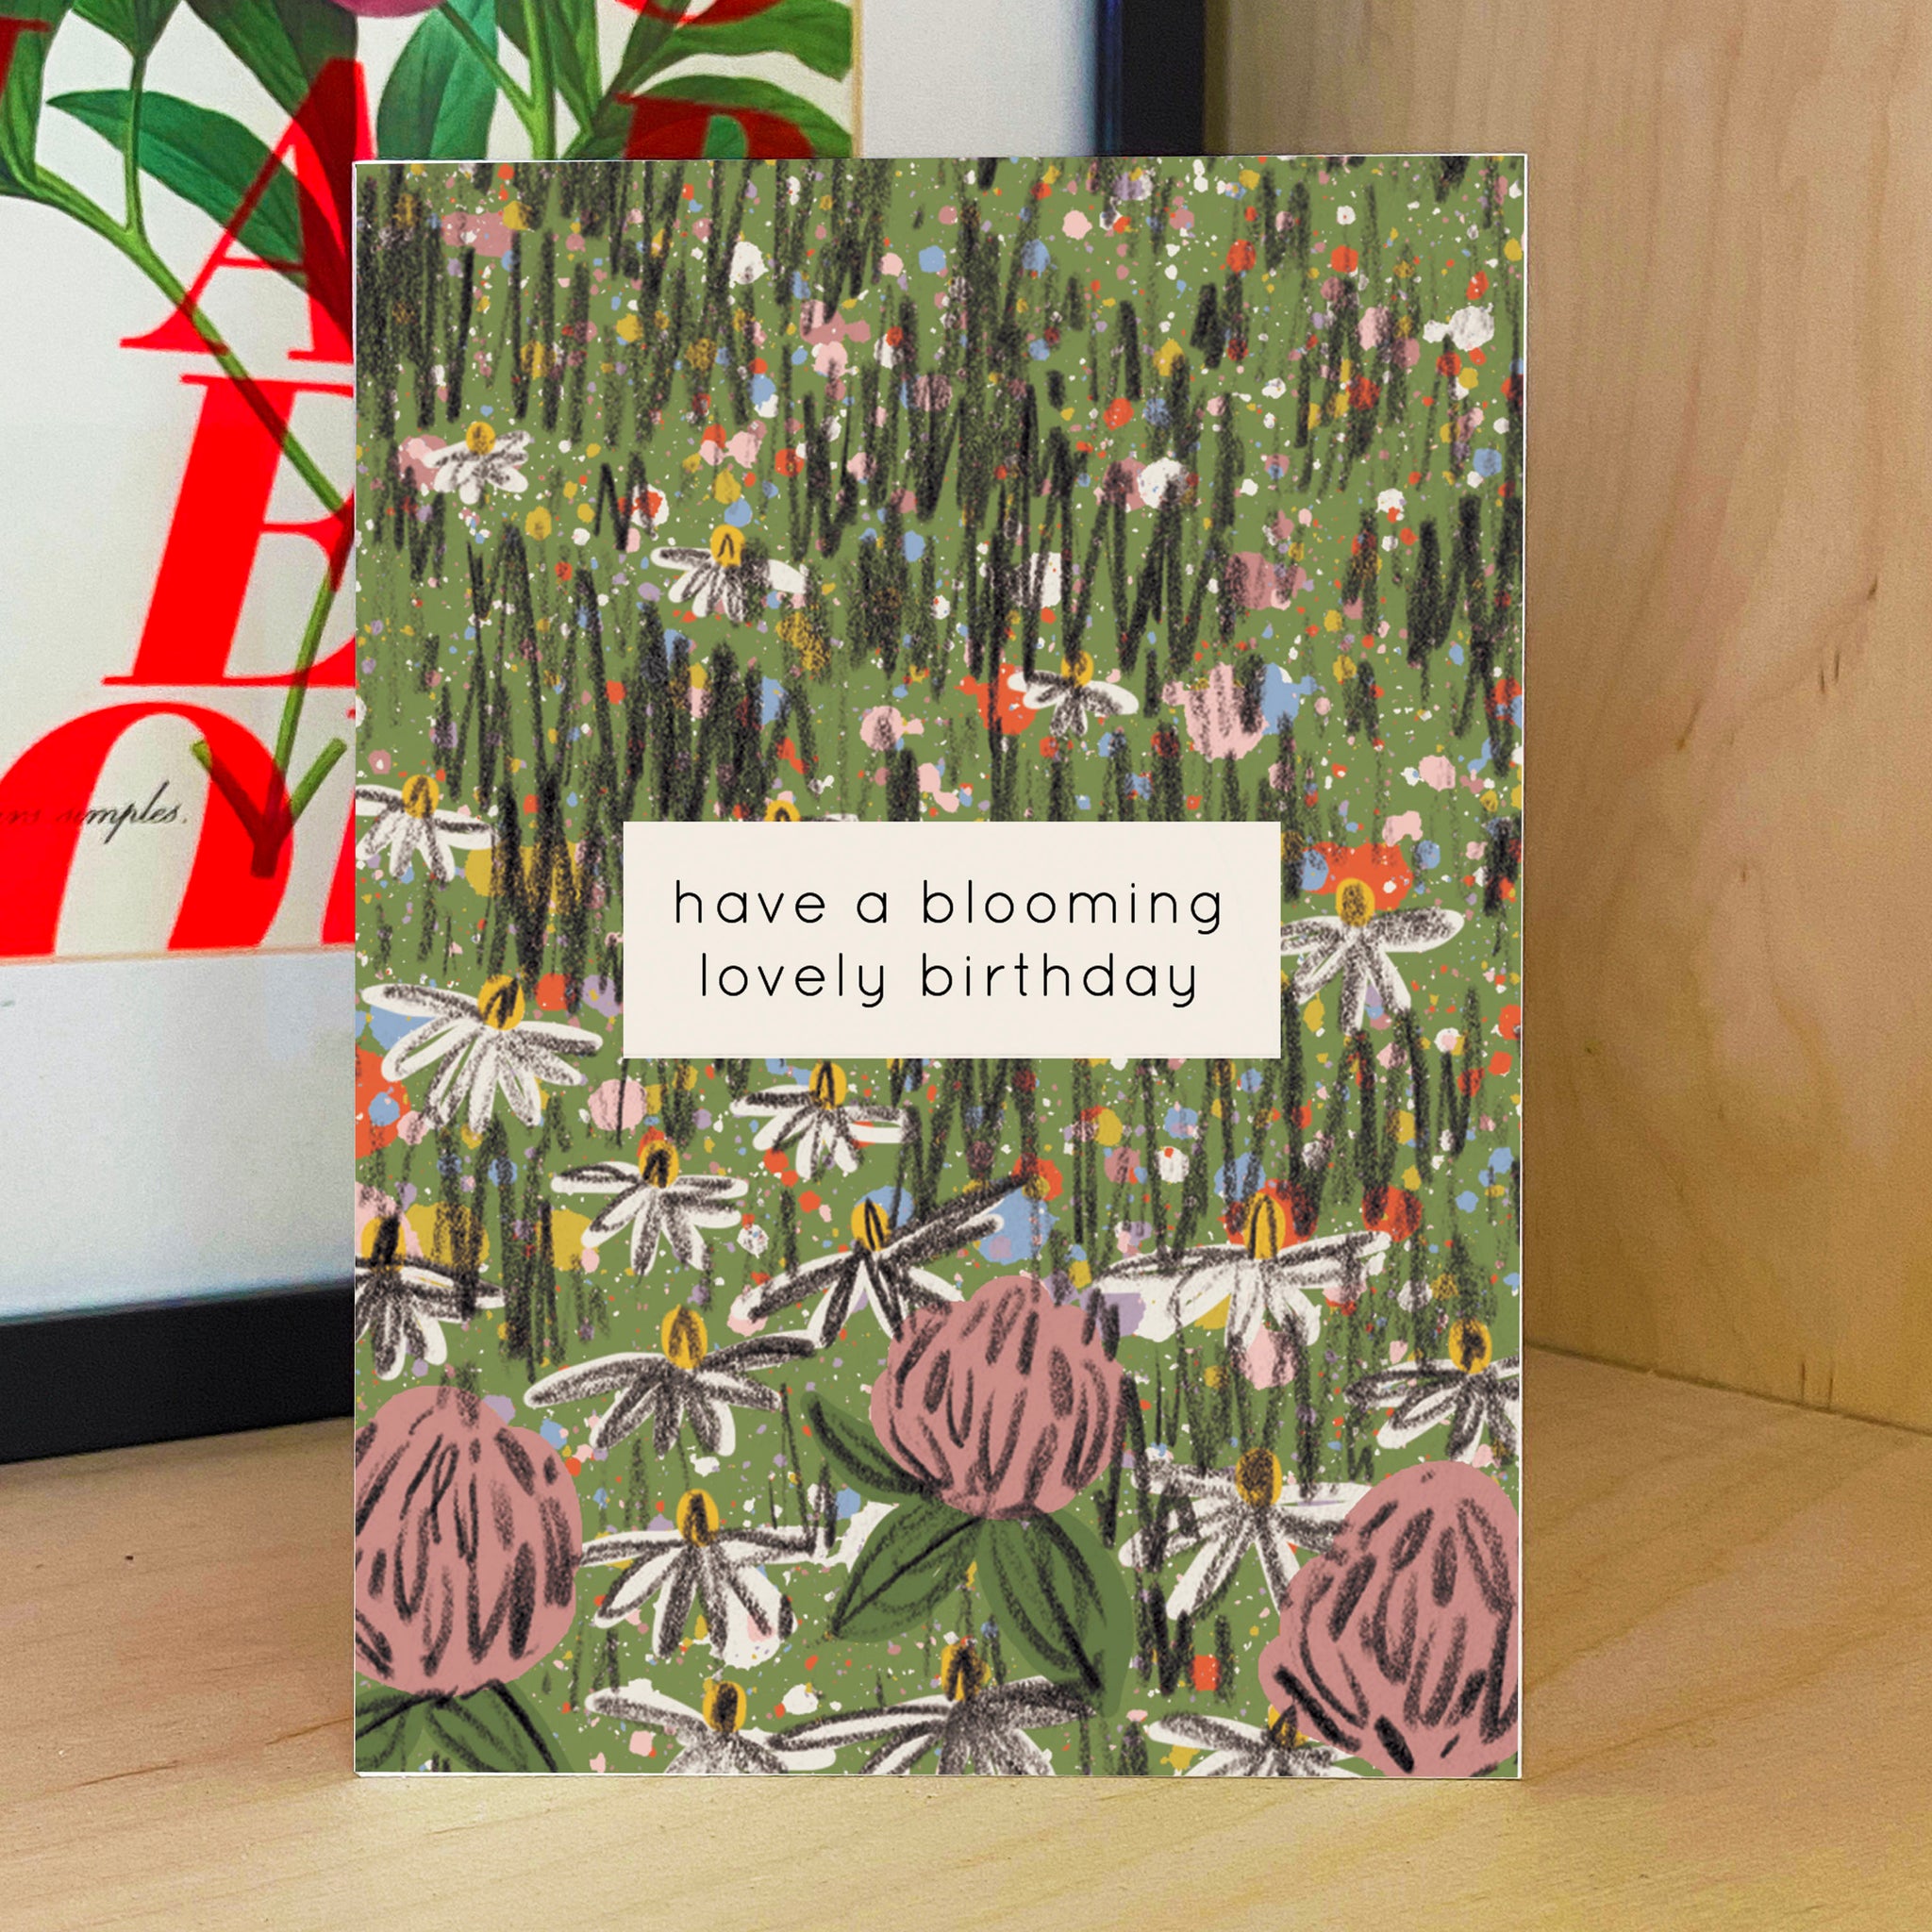 Blooming Lovely Birthday Card